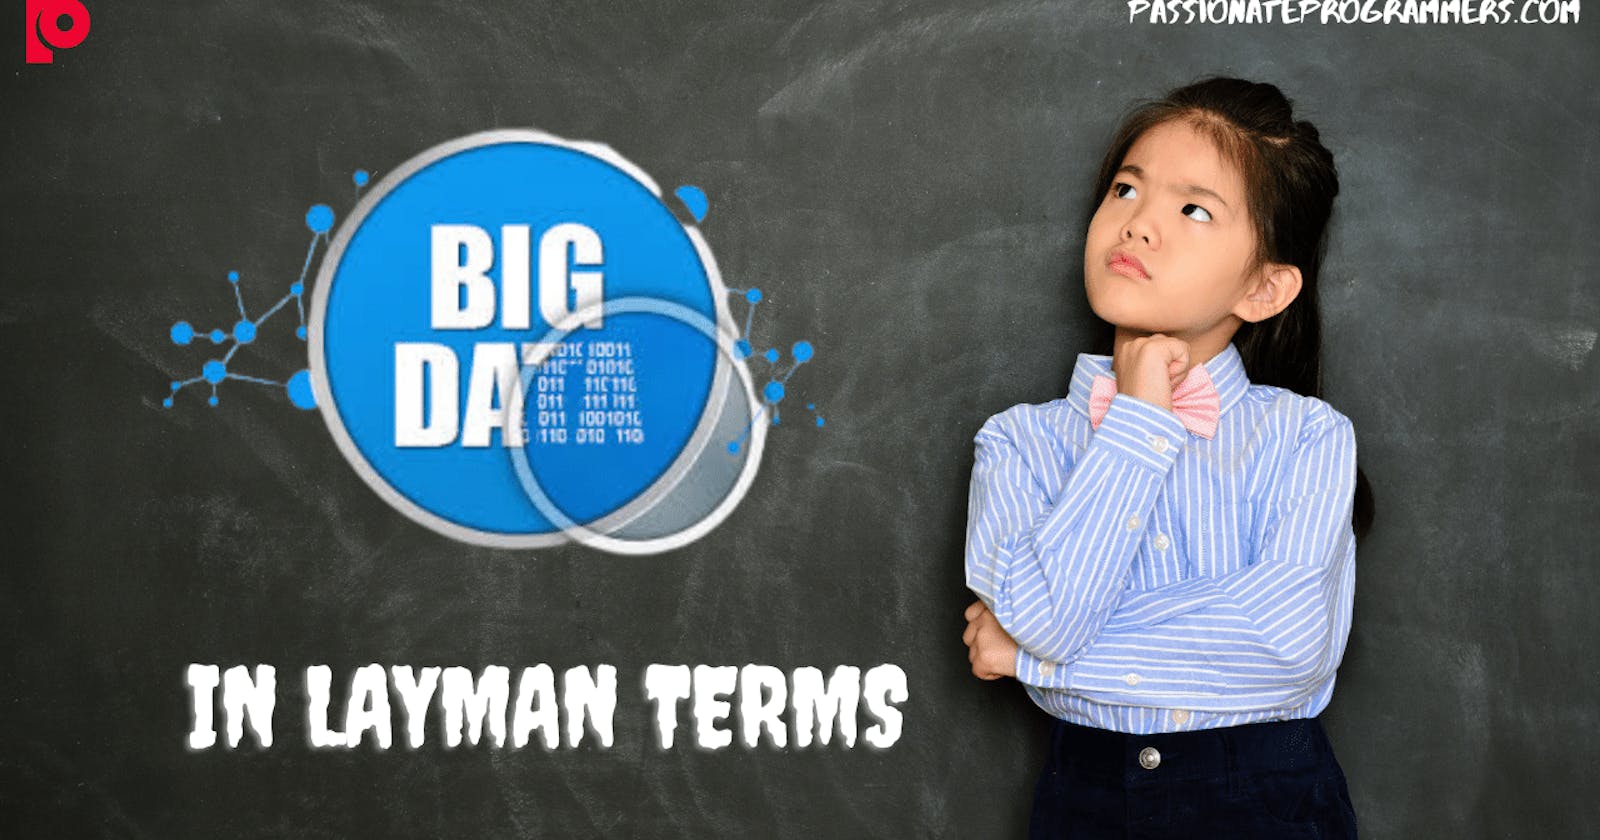 How do you explain Big Data in Layman terms and what does it do